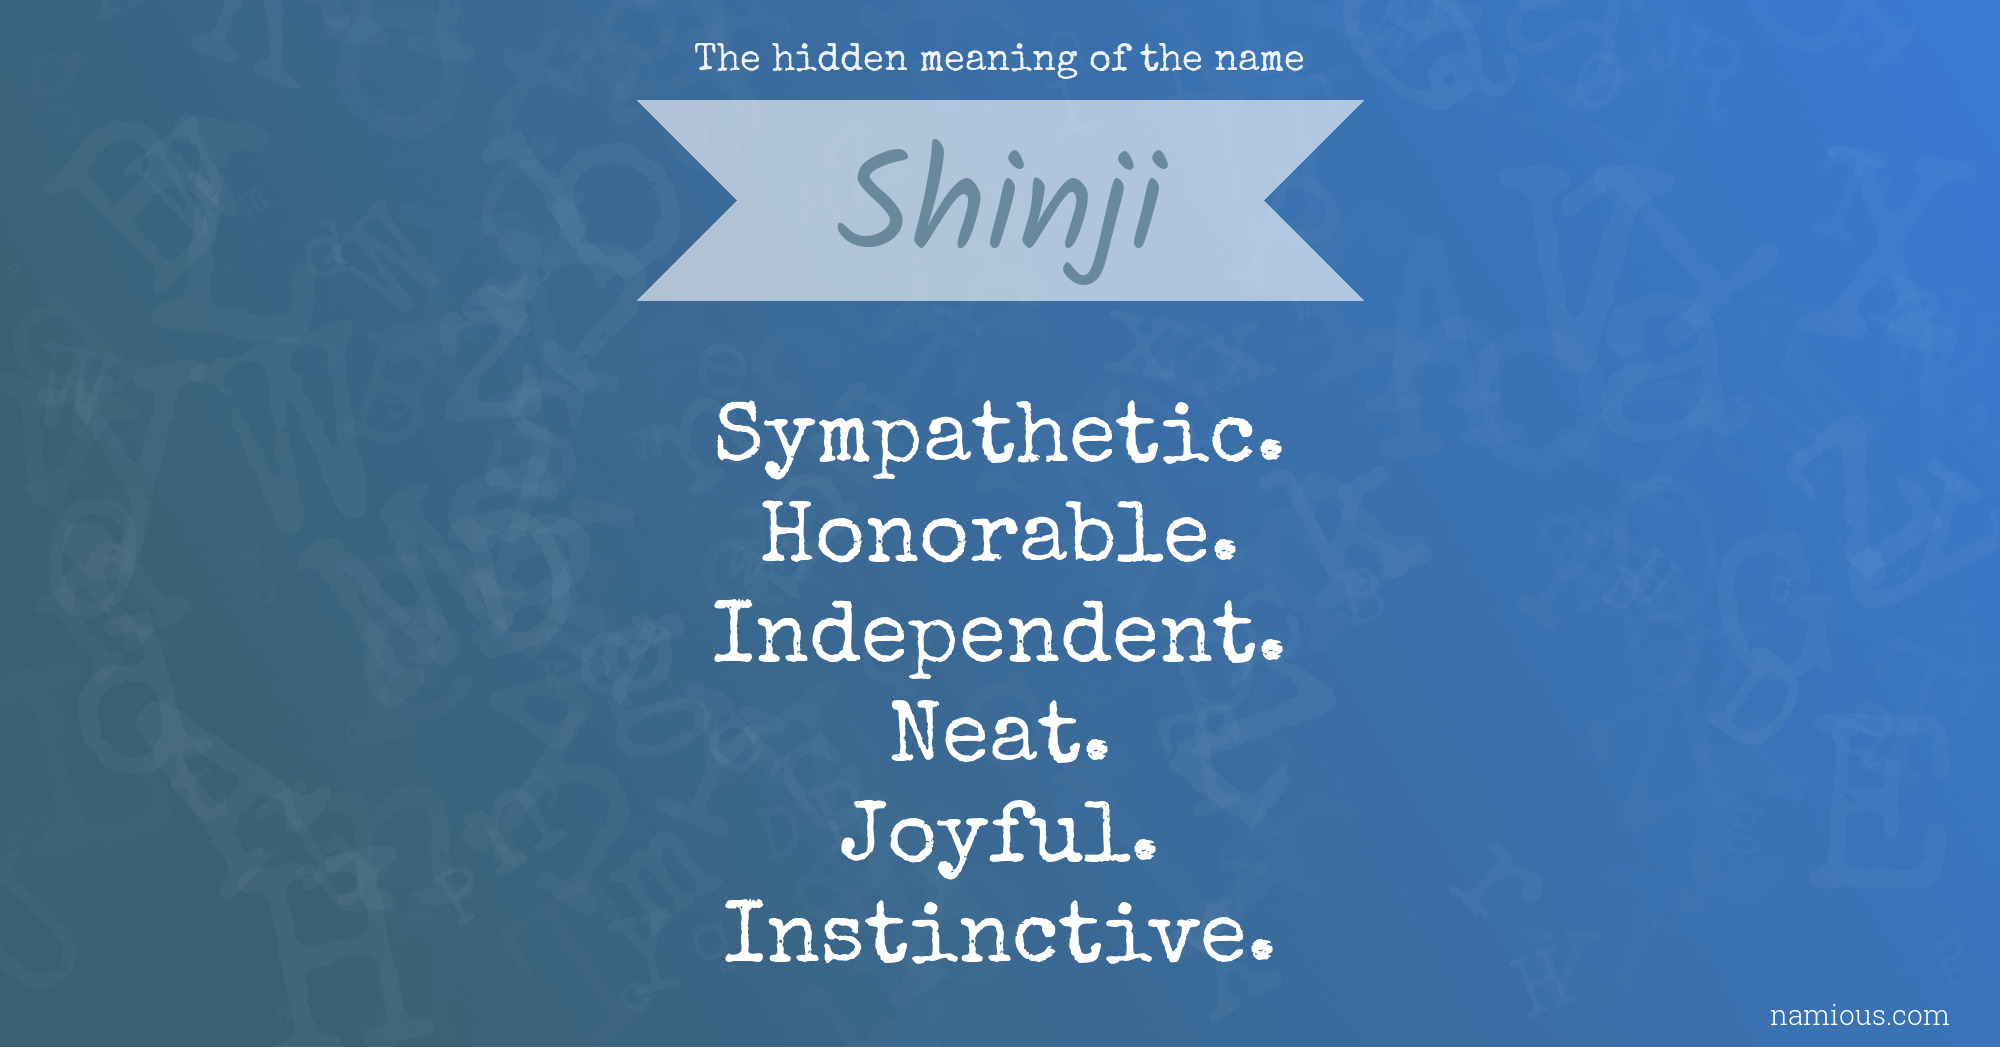 The hidden meaning of the name Shinji